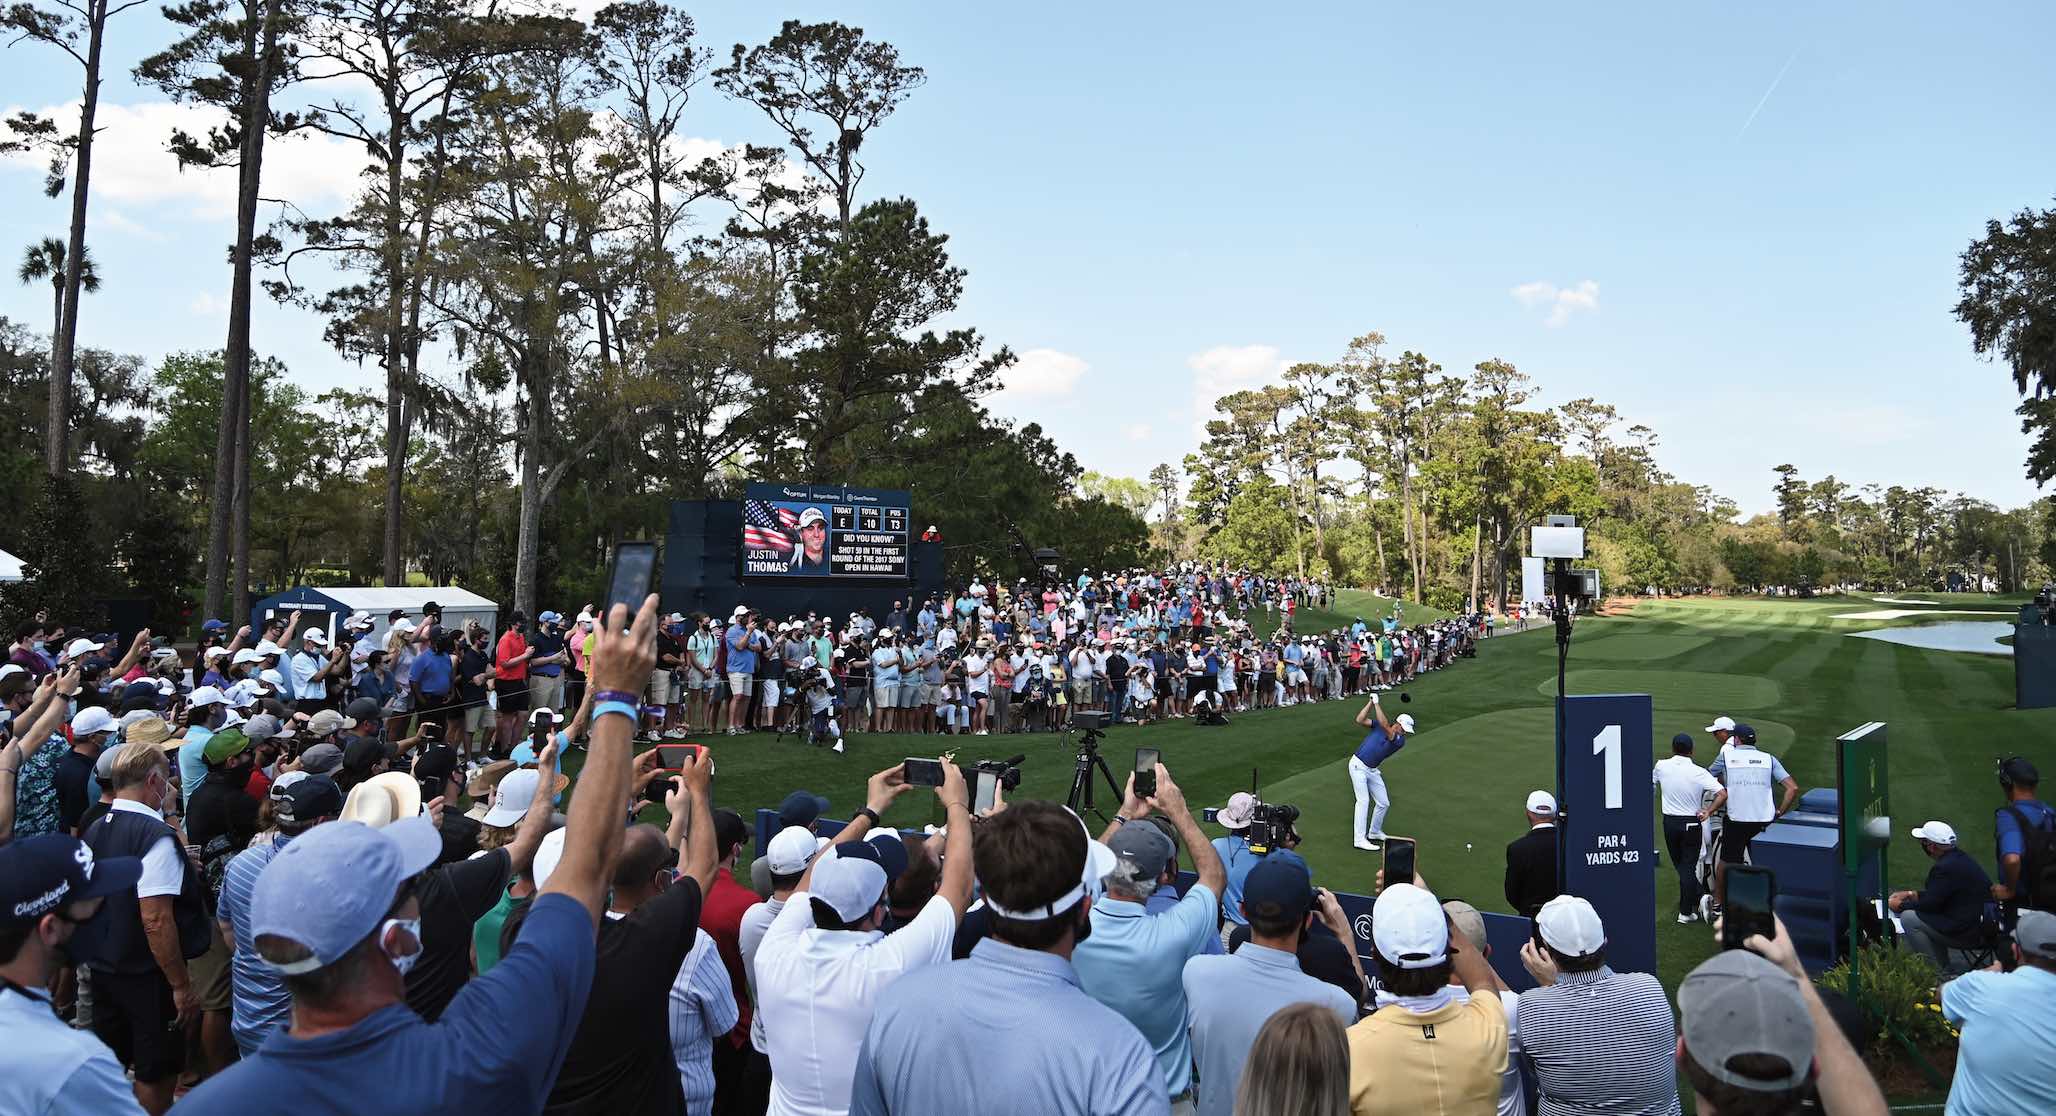 Players Championship has major appeal